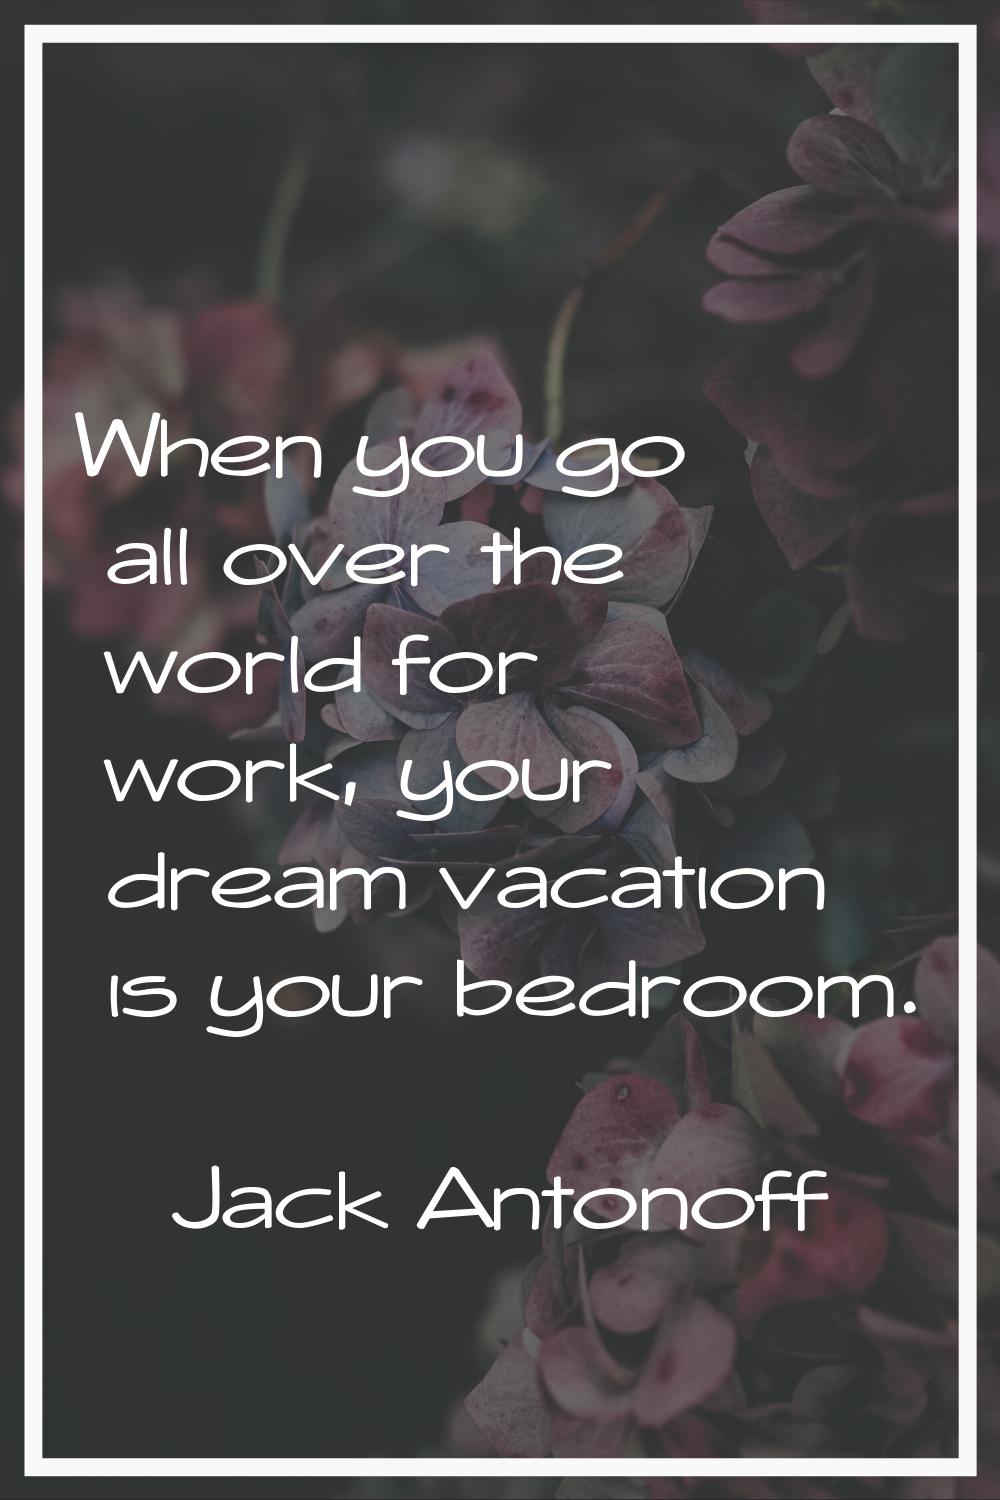 When you go all over the world for work, your dream vacation is your bedroom.